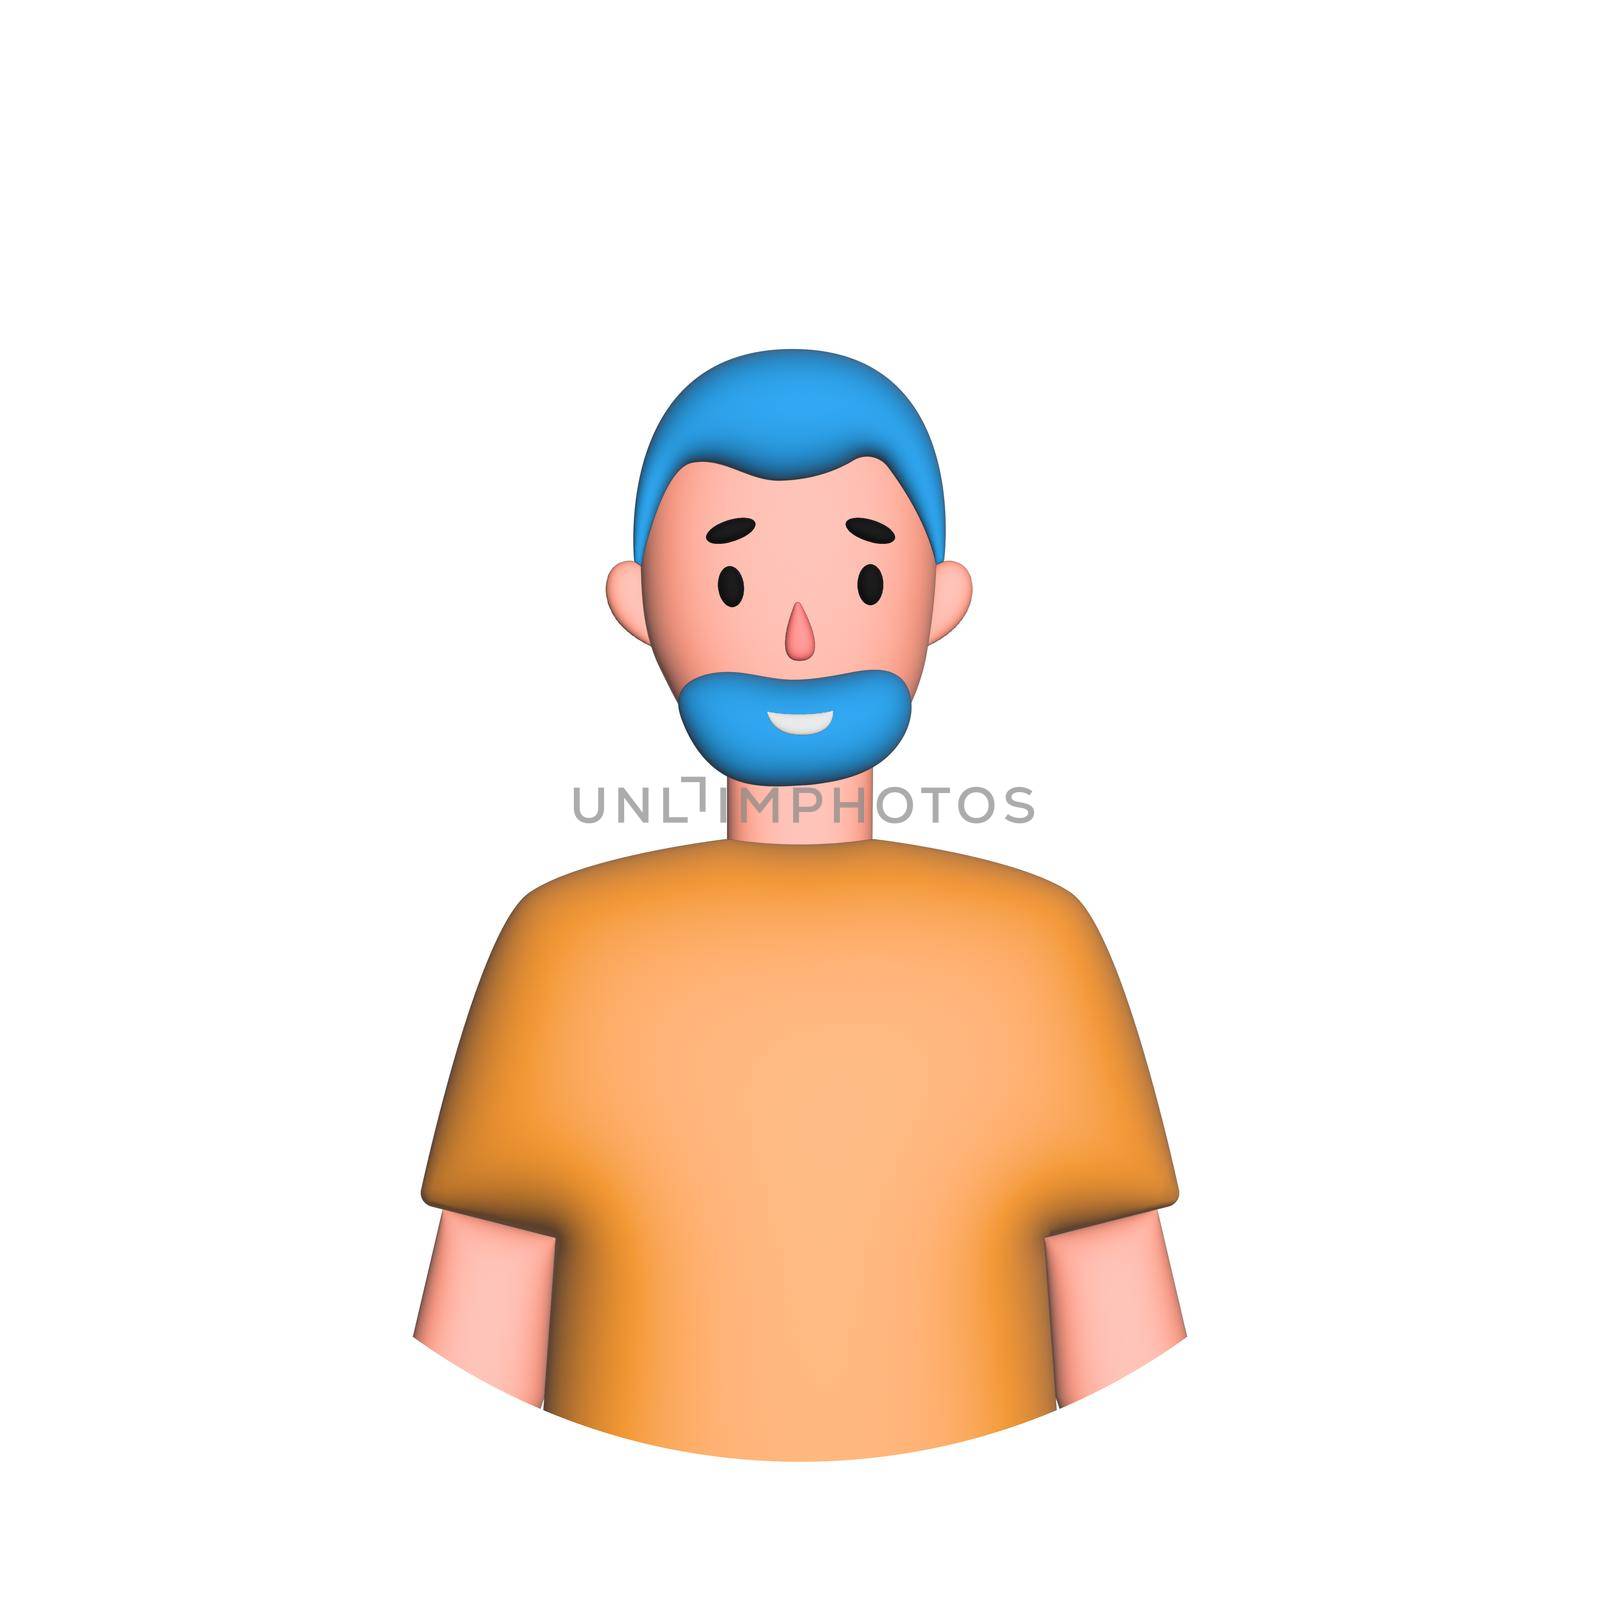 Web icon man, middle-aged man with beard - illustration